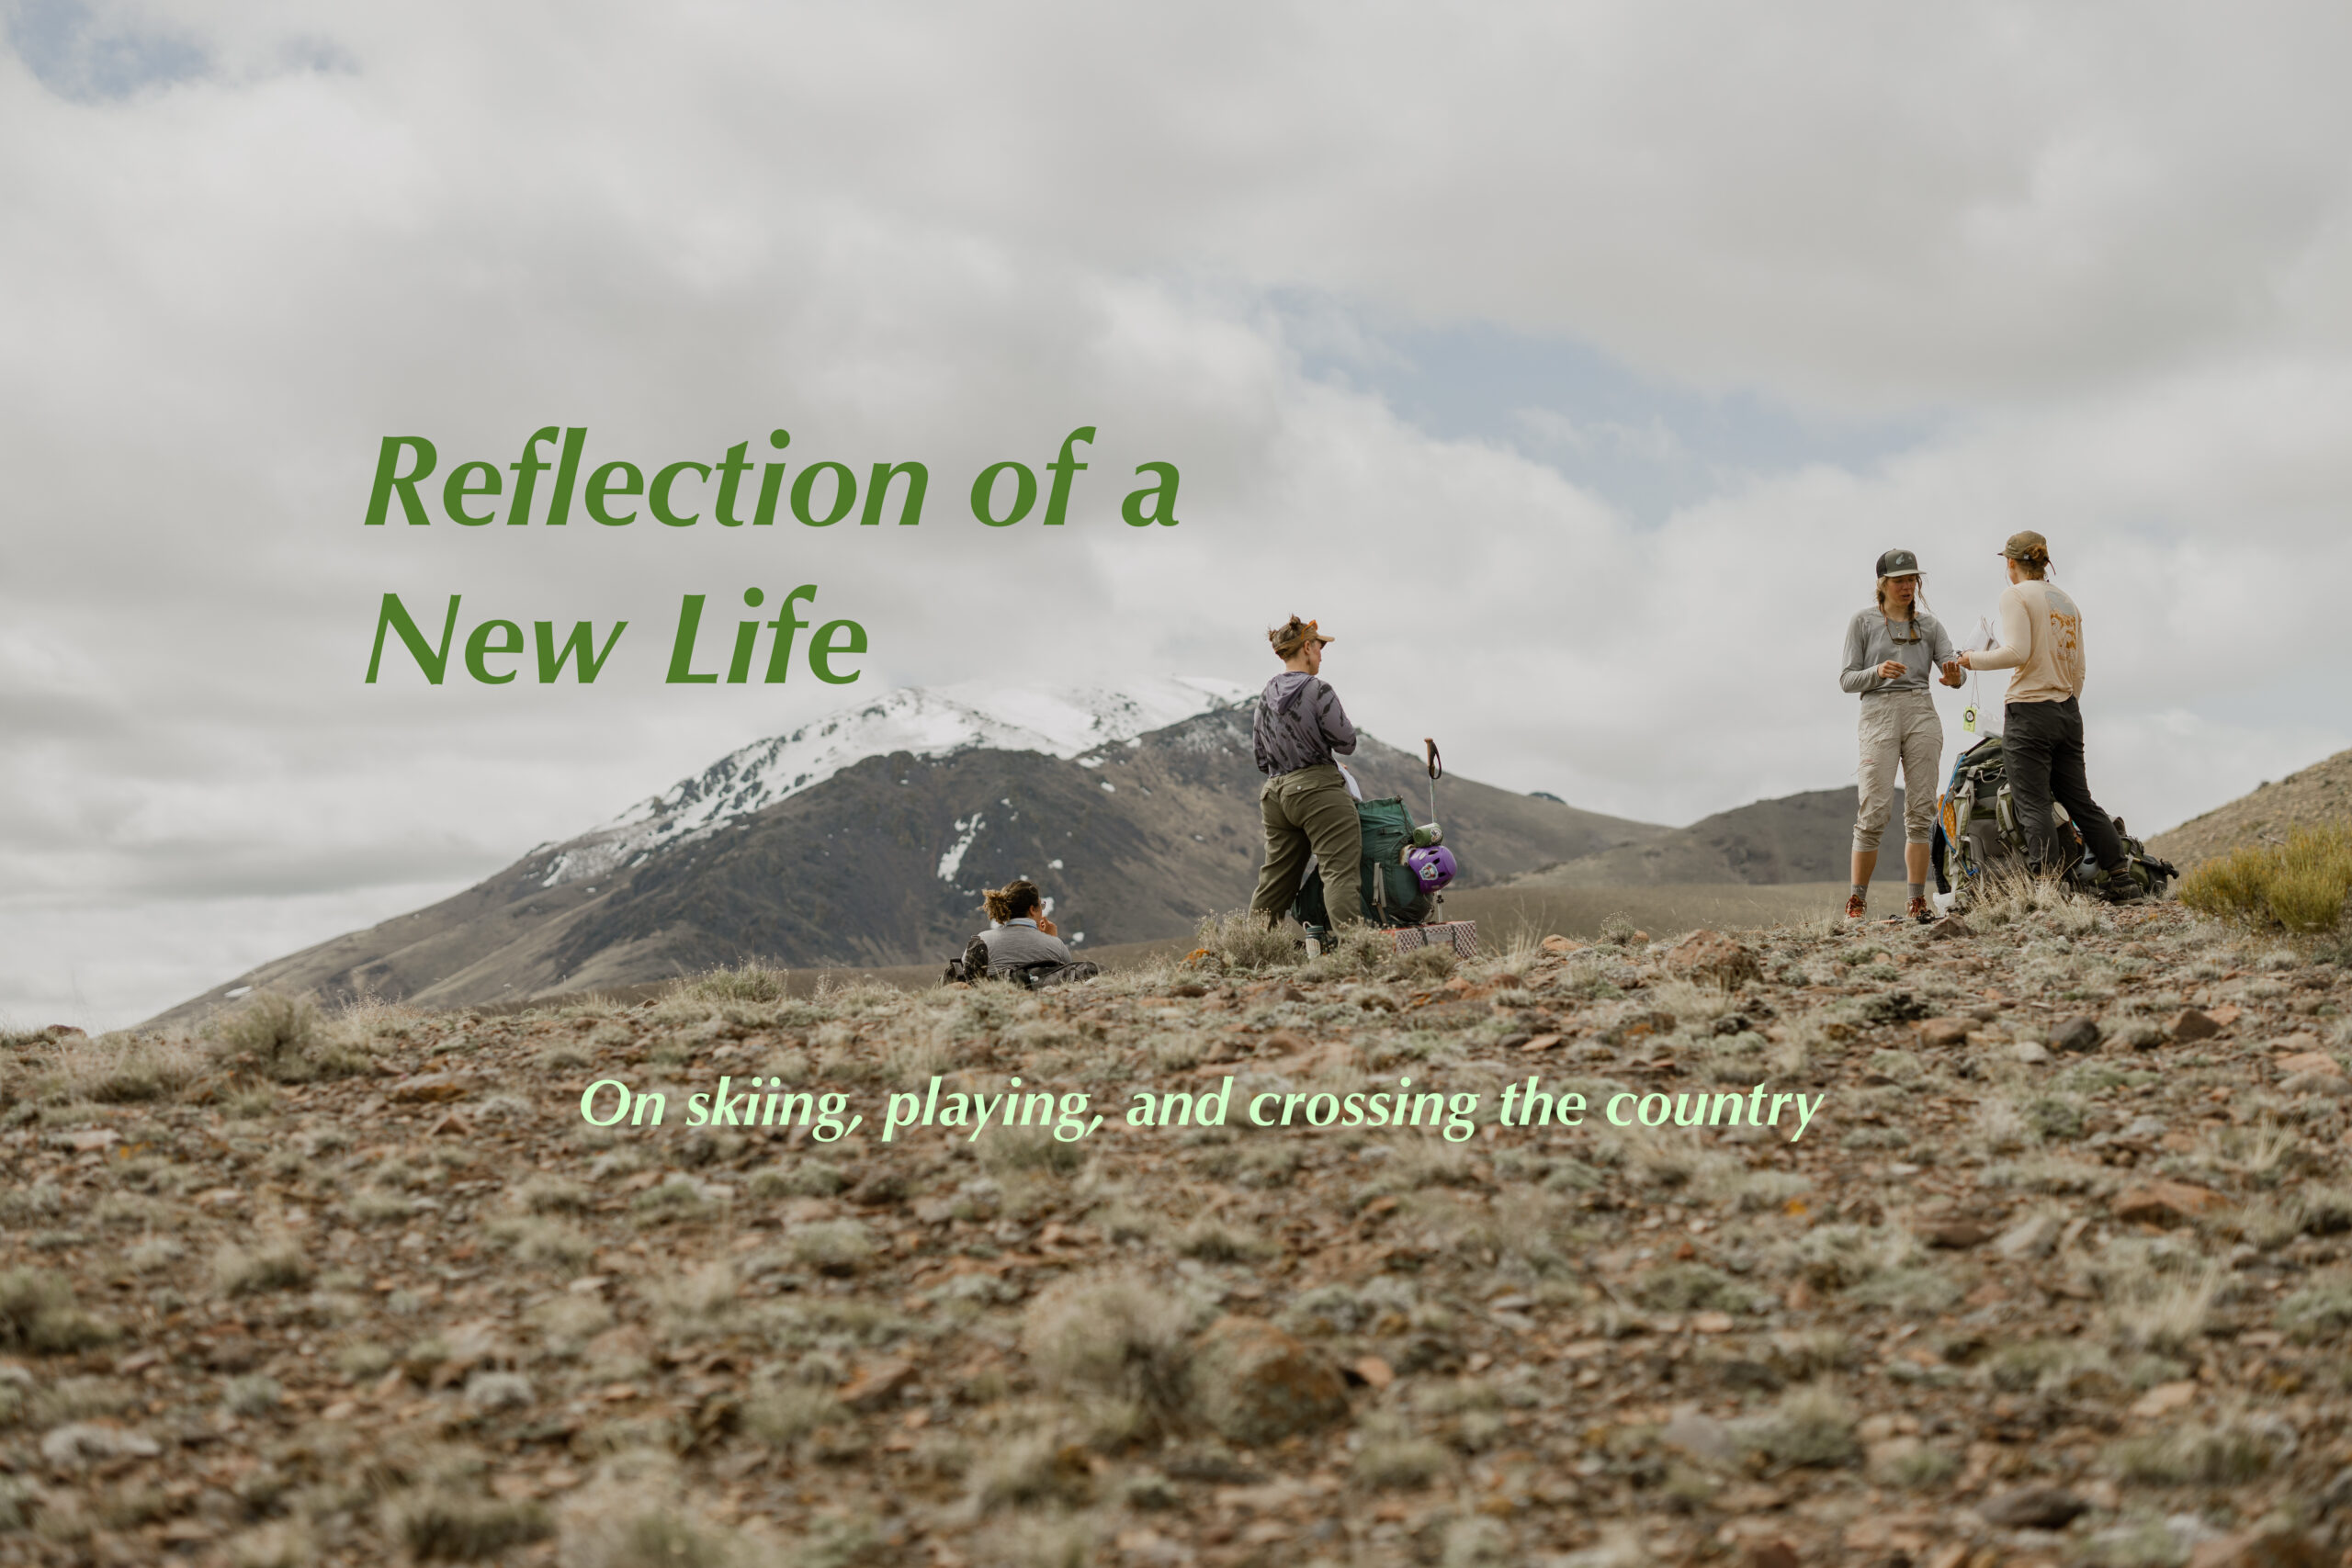 Reflection on a New Life